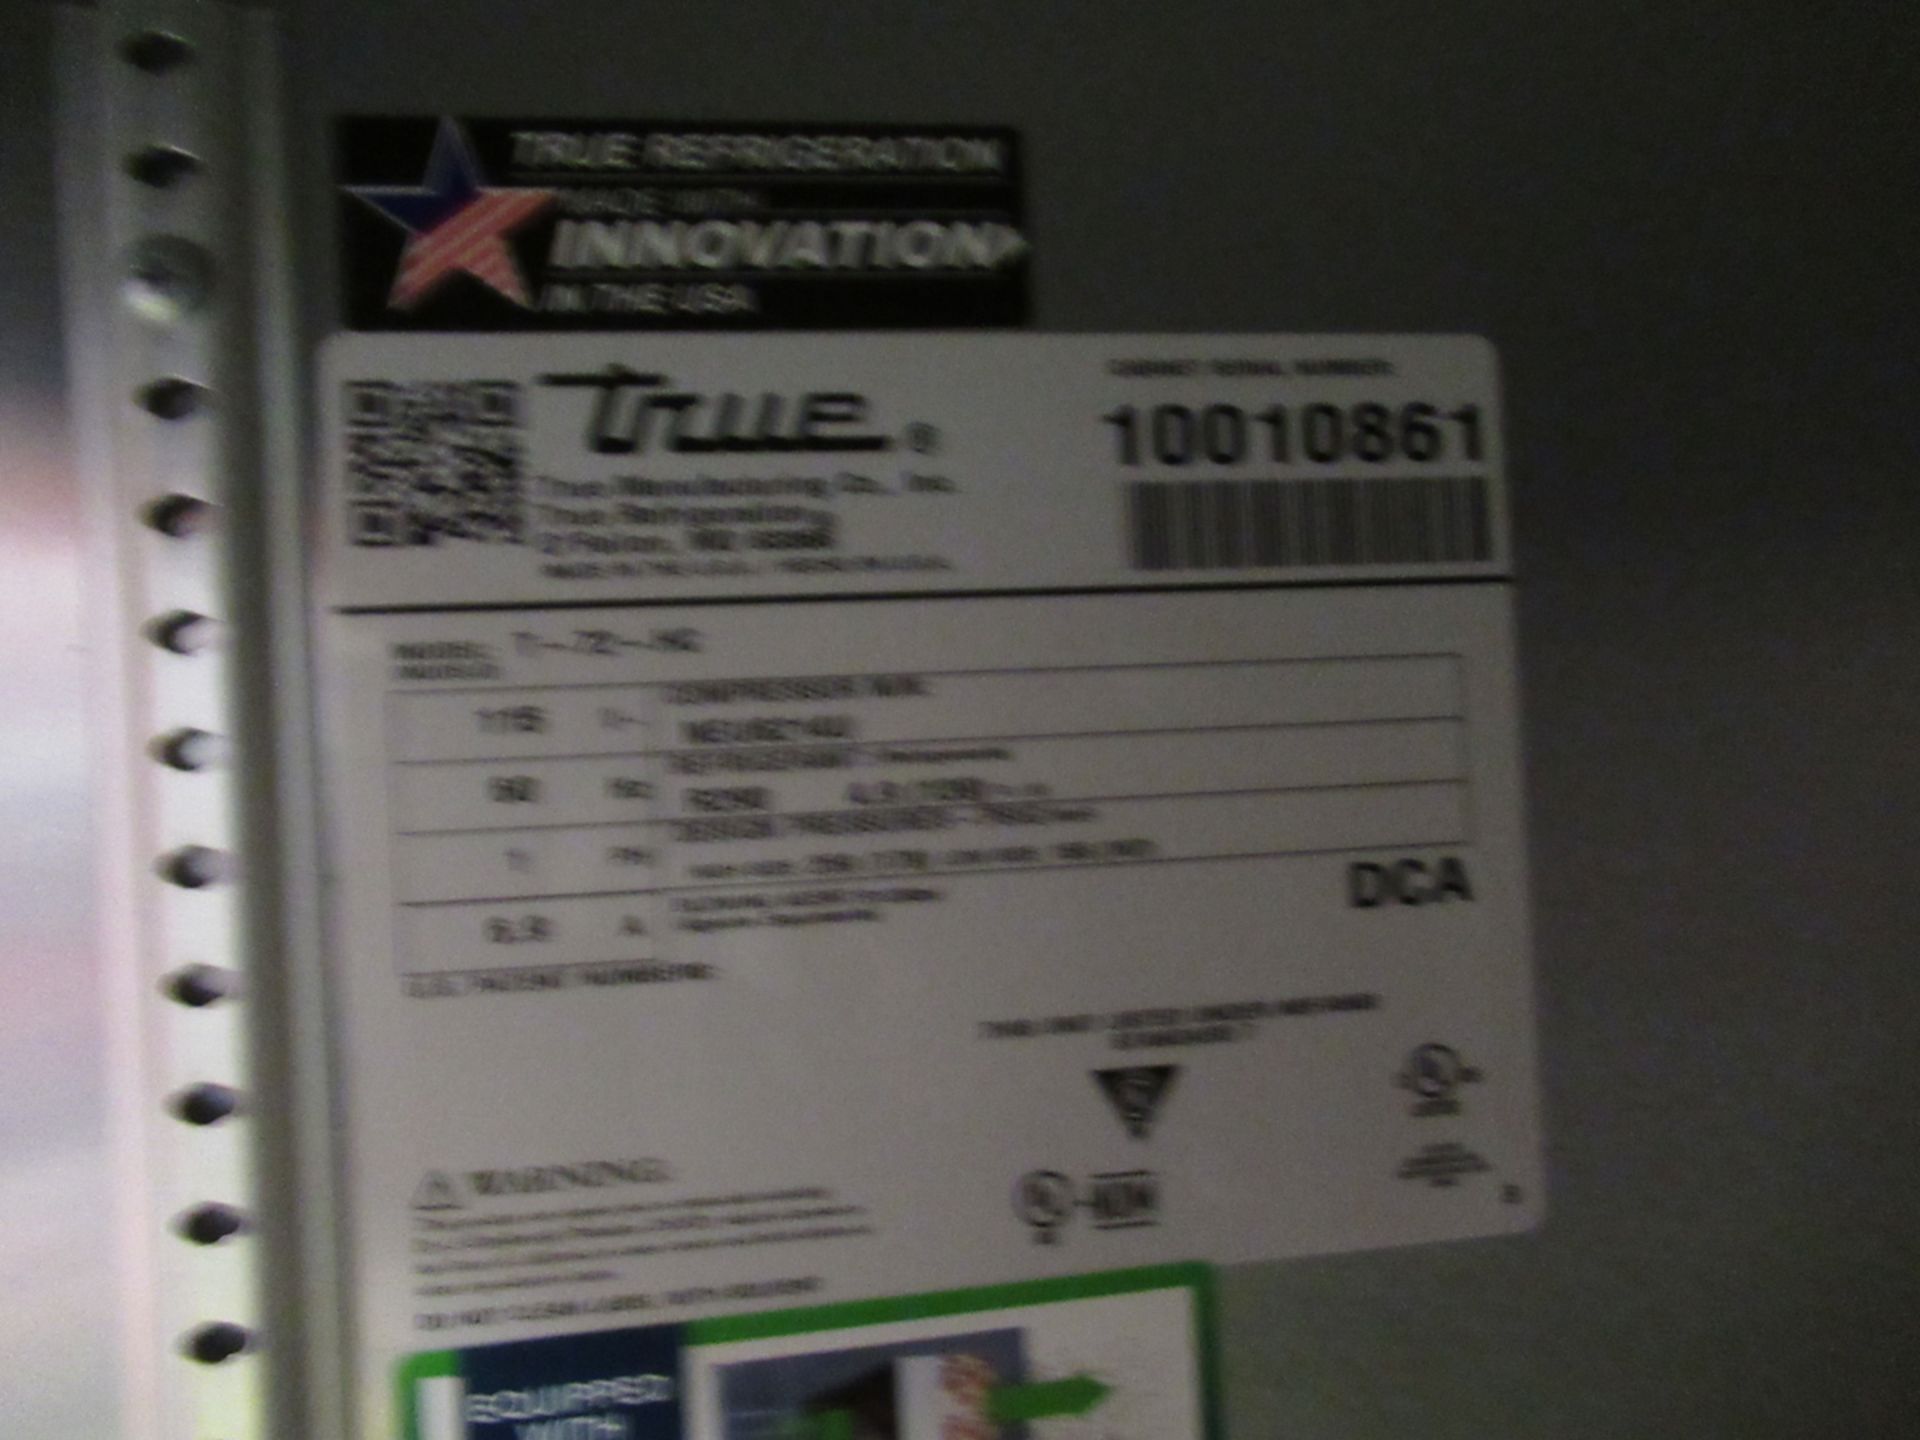 TRUE T-72-HC 78 1/10" THREE SECTION REACH IN REFRIGERATOR, S/N: 10010861 - Image 2 of 3